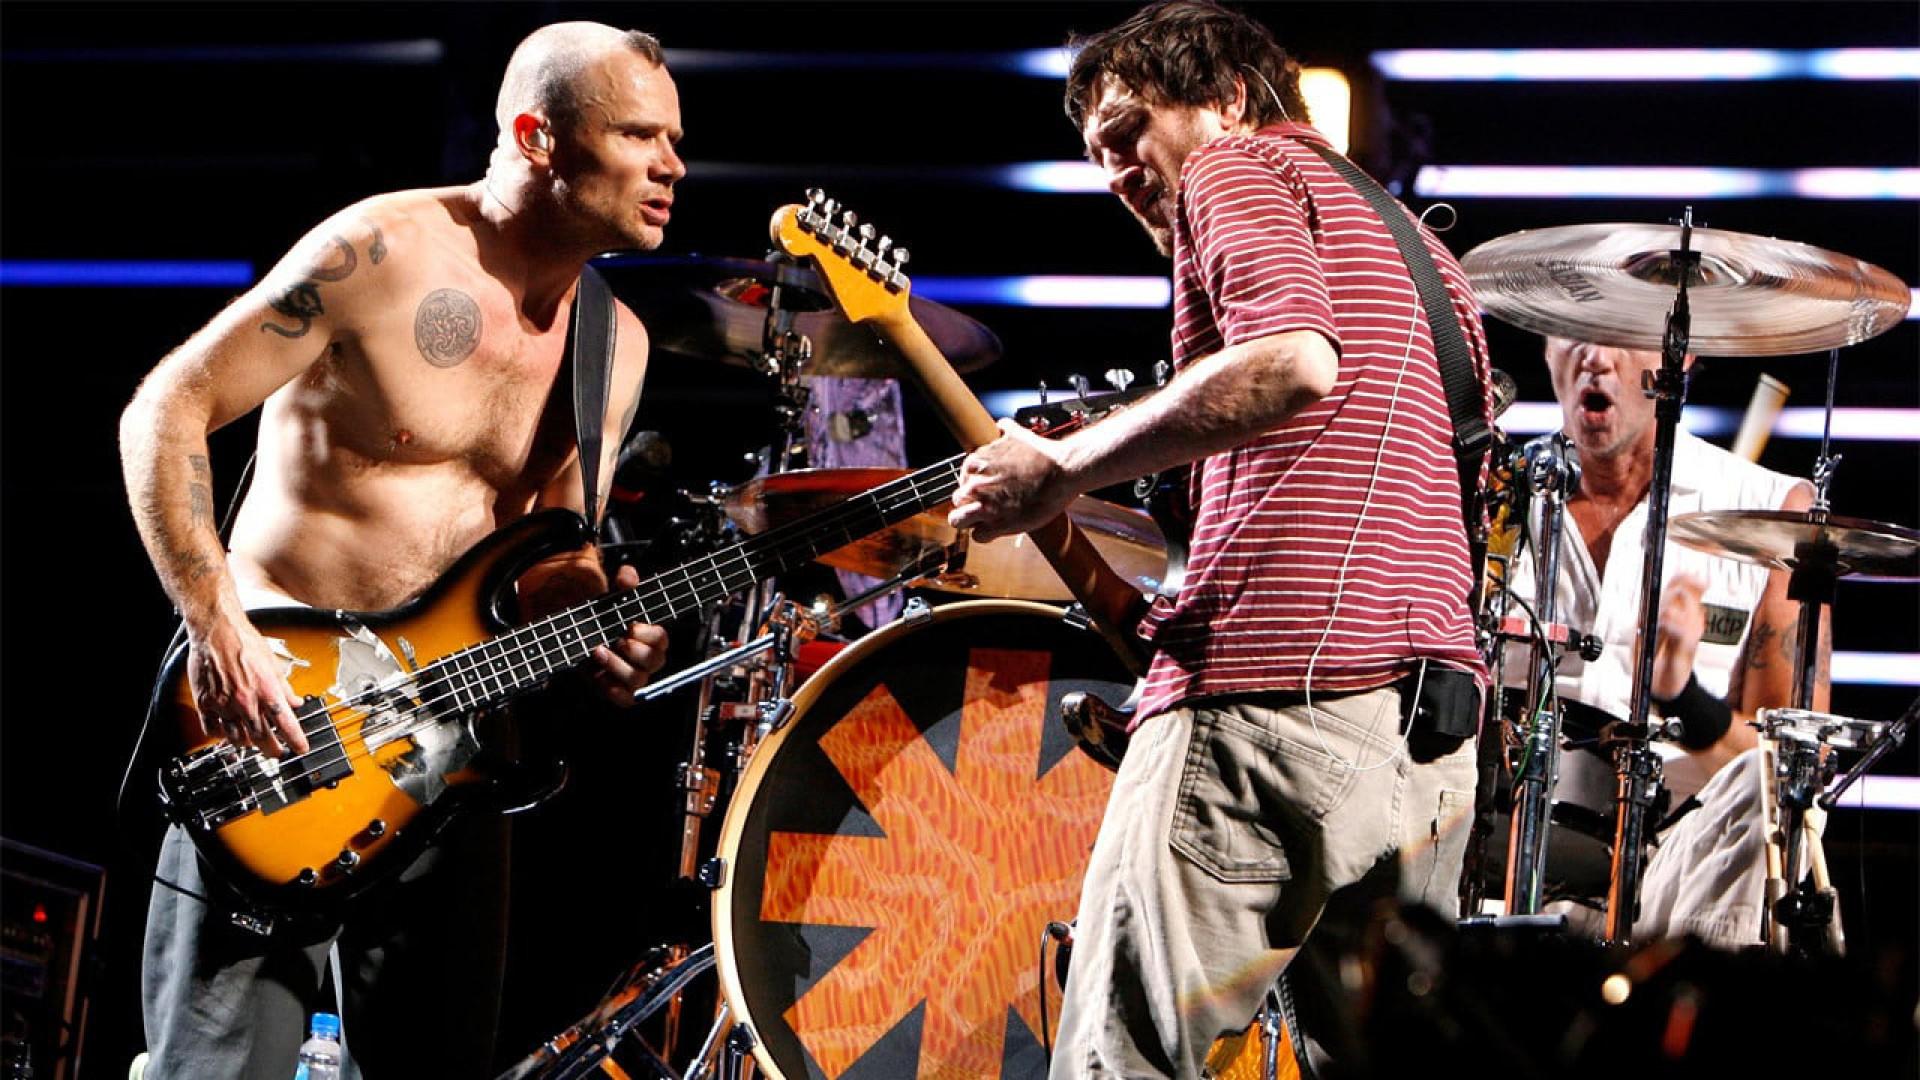 Red Hot Chili Peppers: Off the Map